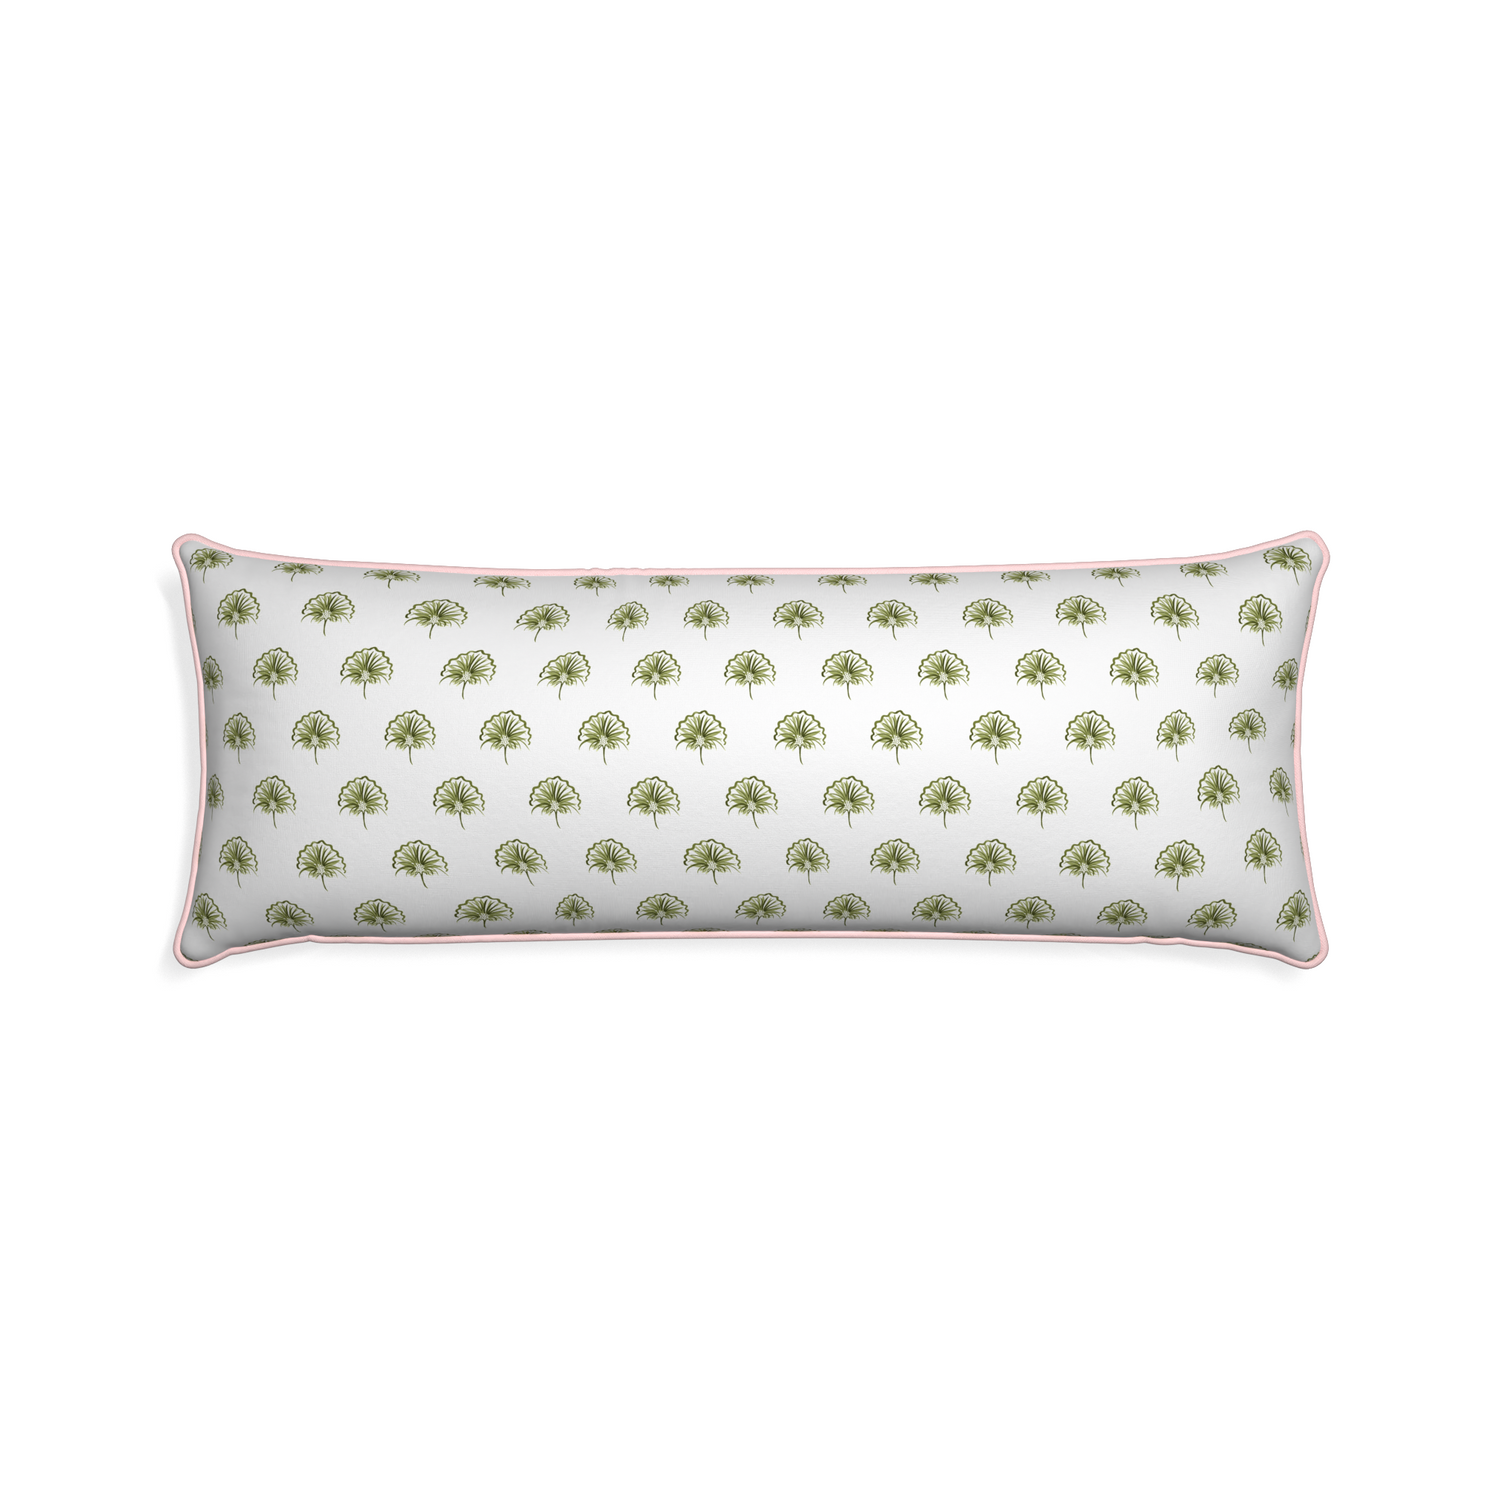 Xl-lumbar penelope moss custom green floralpillow with petal piping on white background